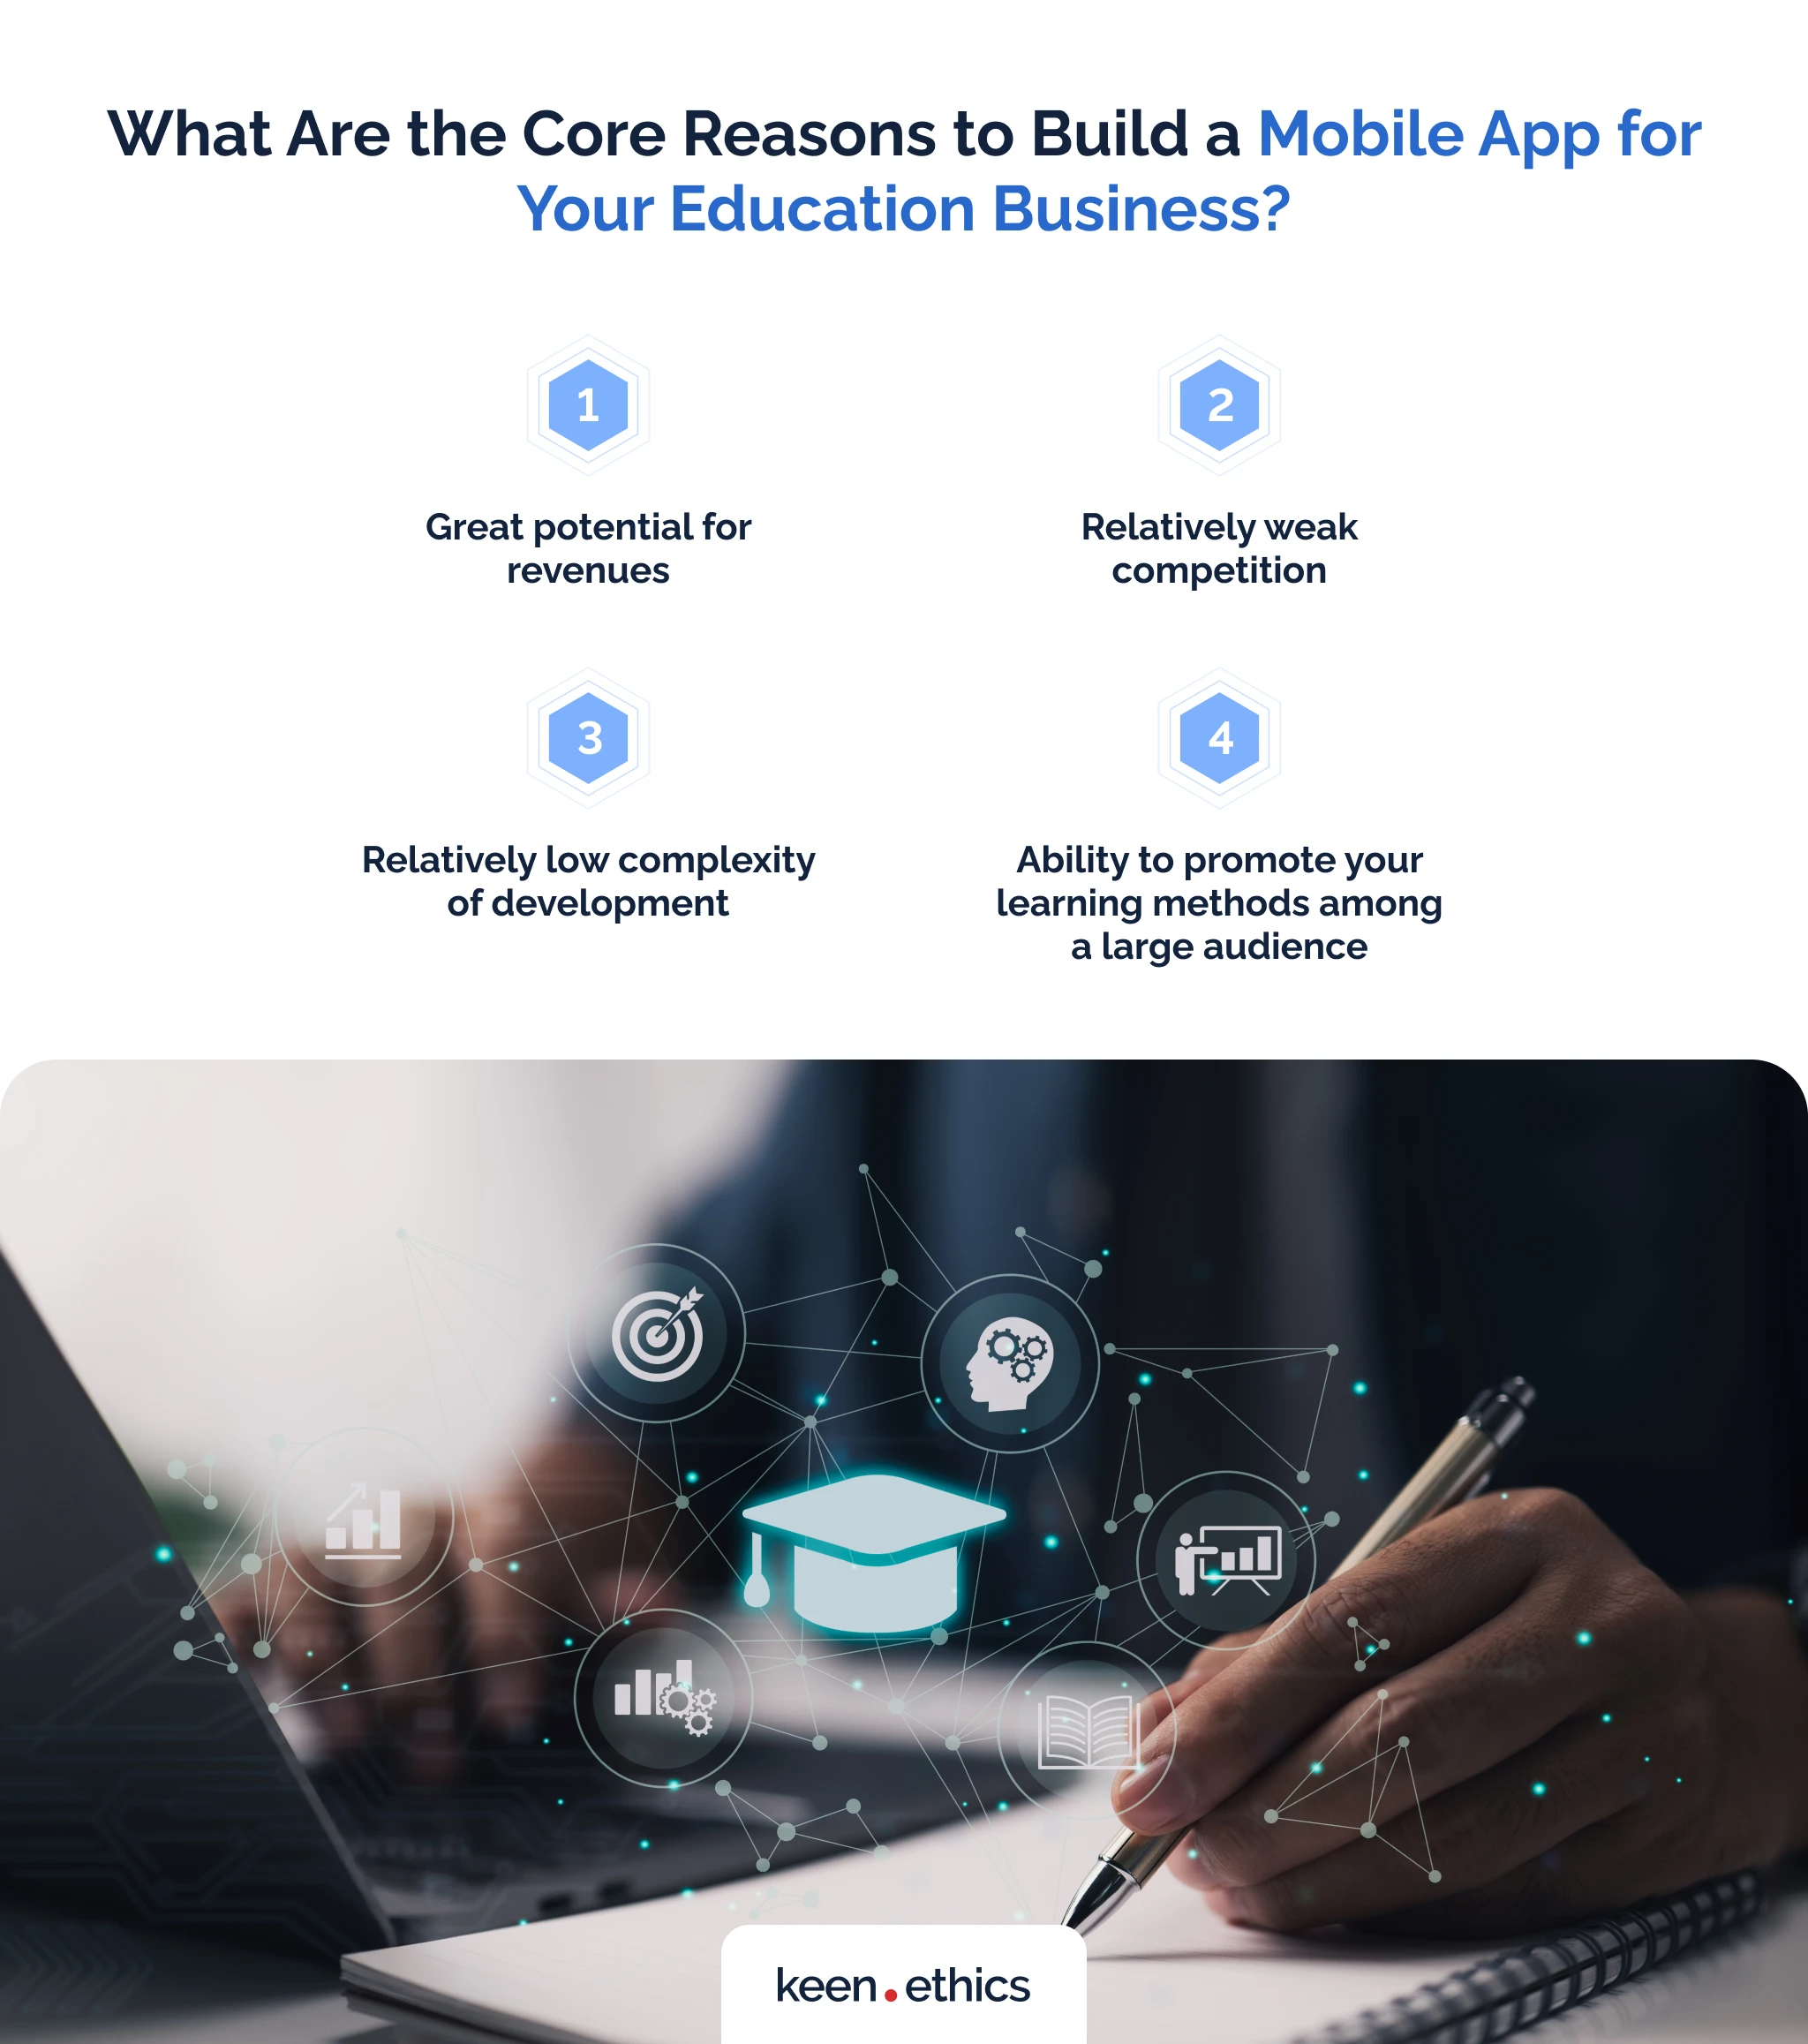 What are the core reasons to build a mobile app for your education business?